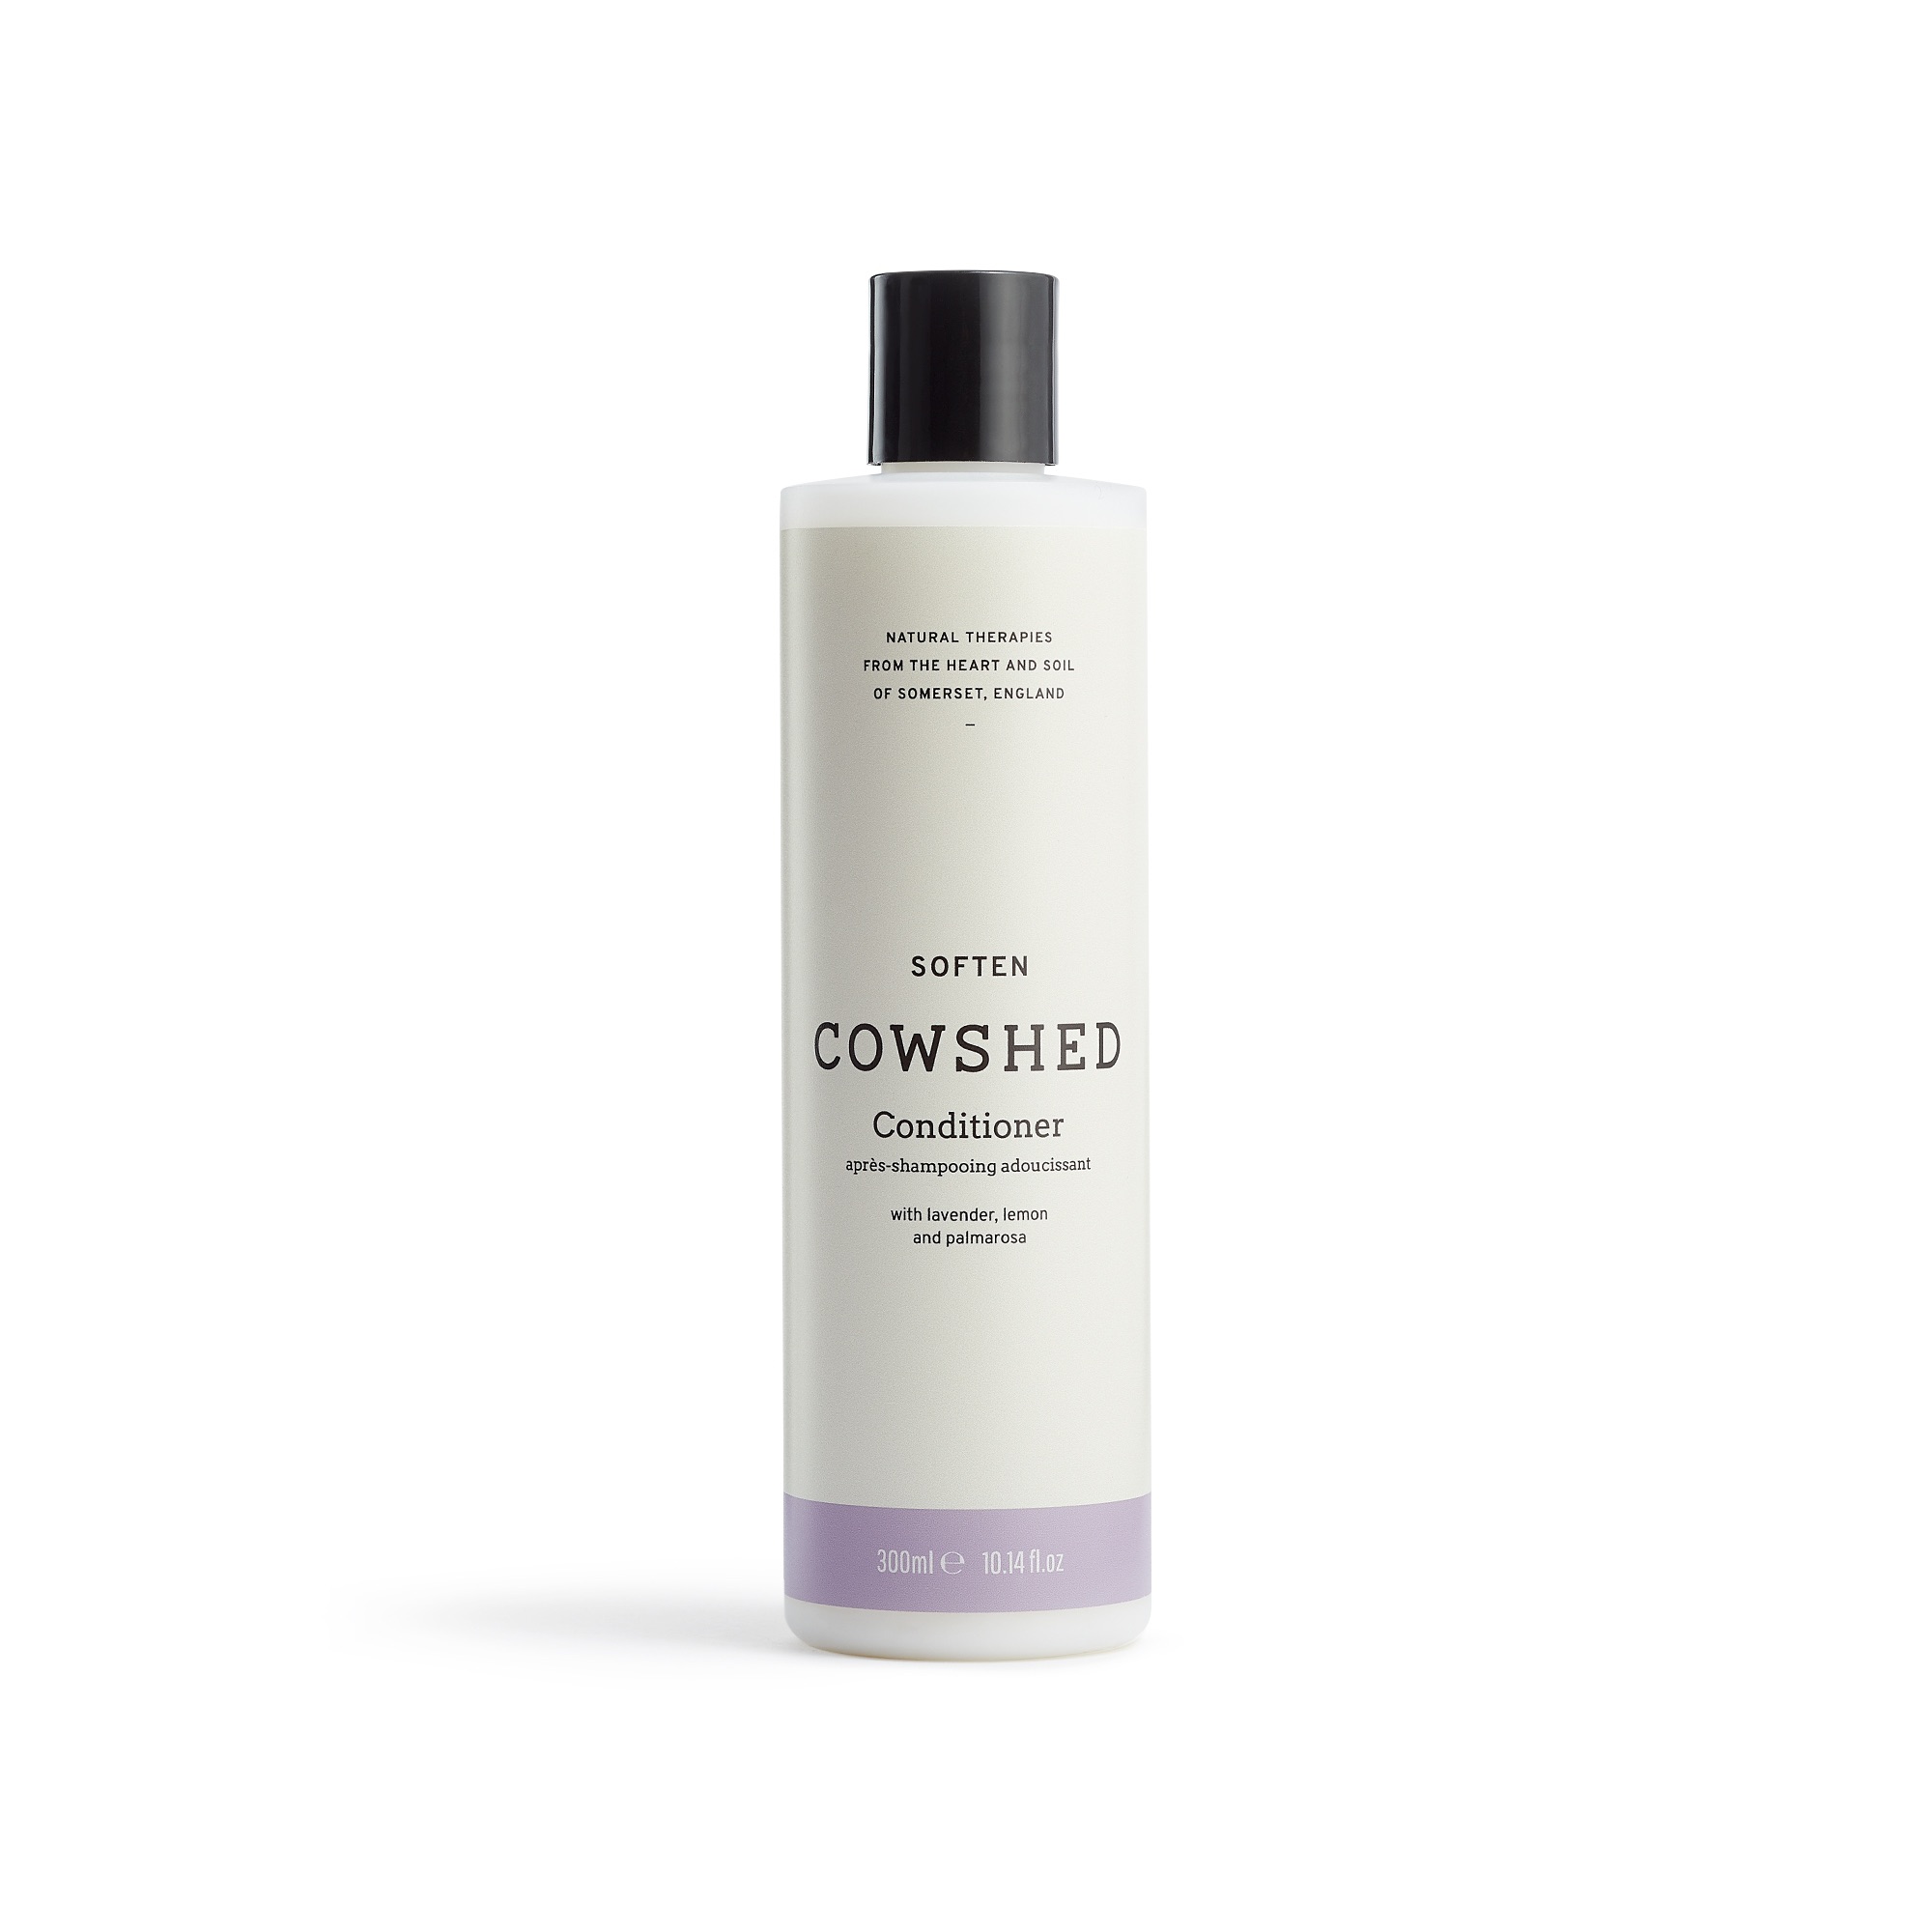 Cowshed SOFTEN Conditioner (Saucy Cow Conditioner) 300ml